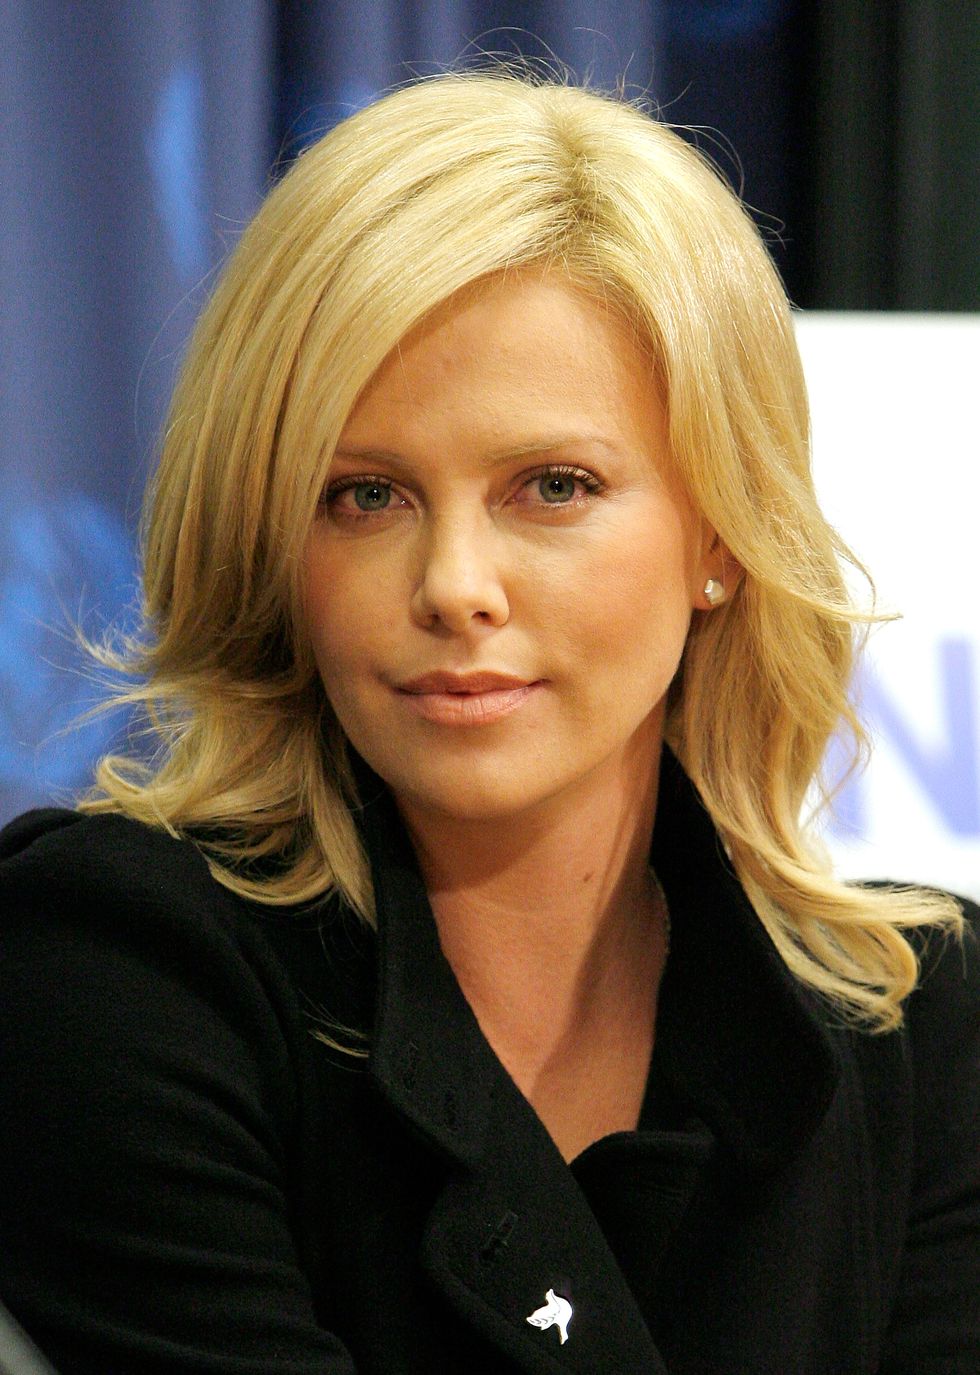 charlize theron inducted as a un messenger of peace   panel discussion